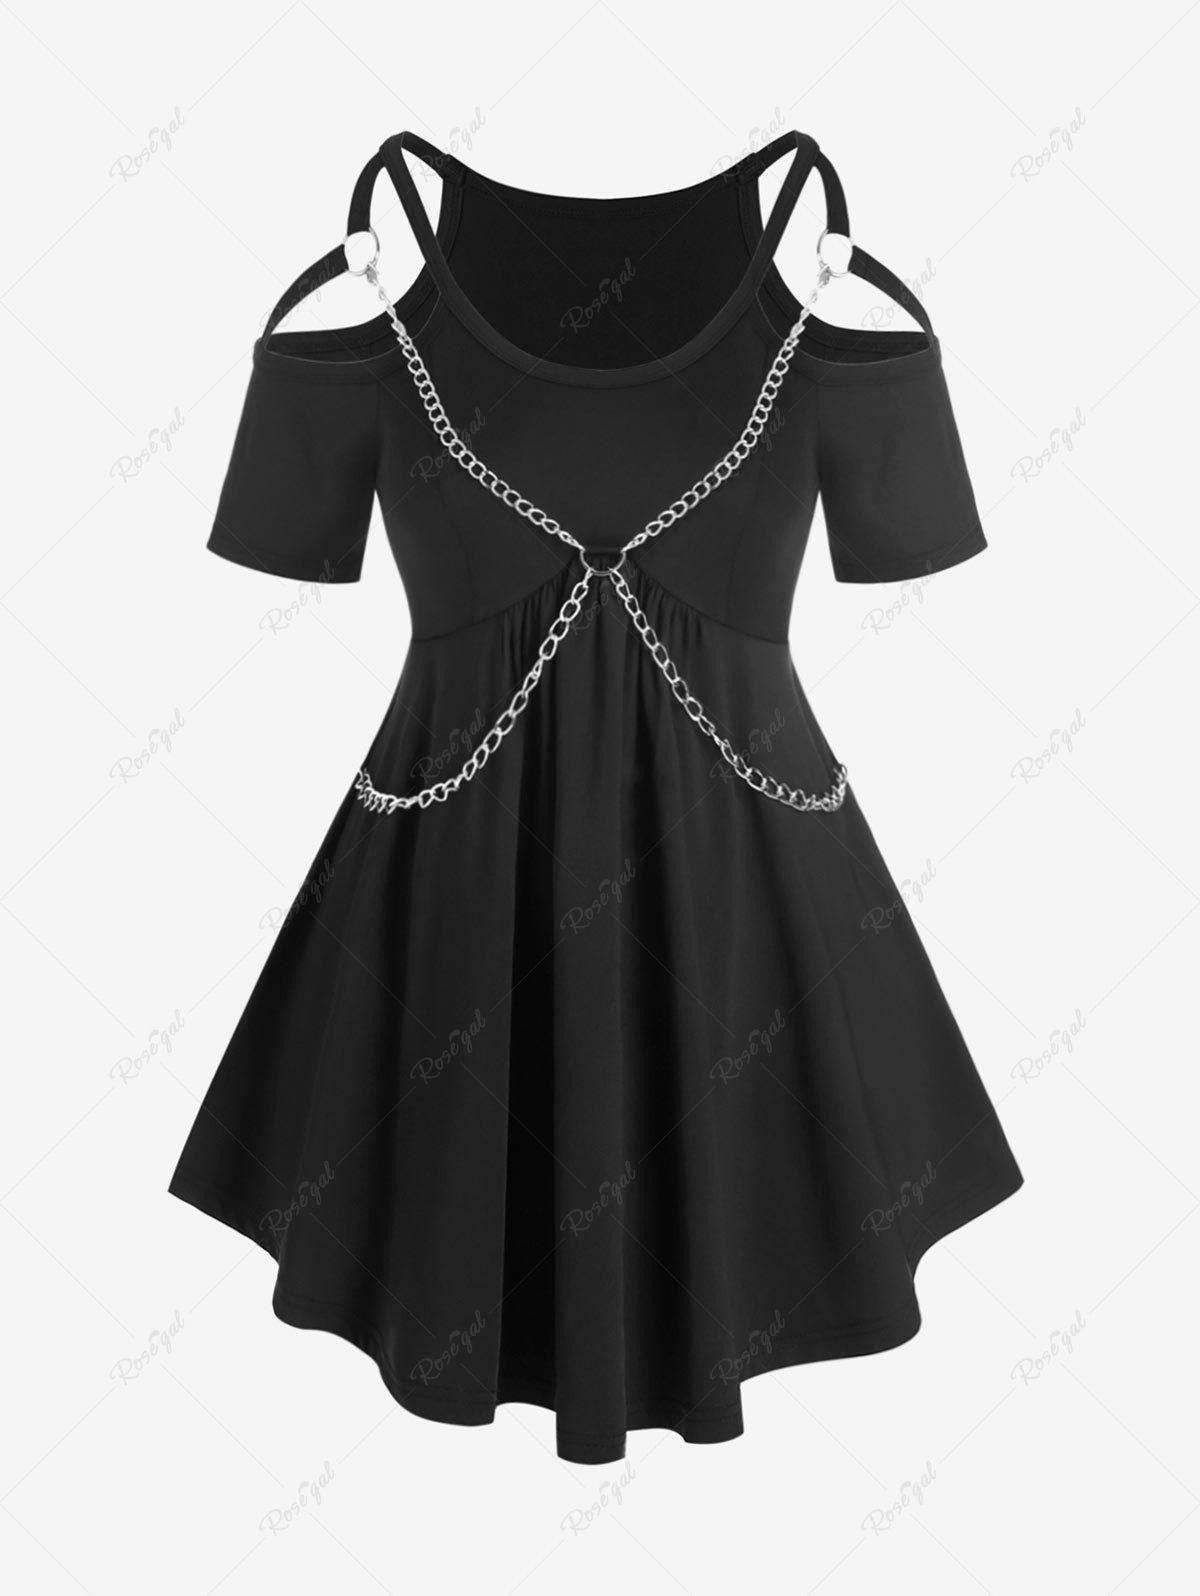 Fancy Plus Size Solid Cold Shoulder Harness Chains Gothic T Shirt  